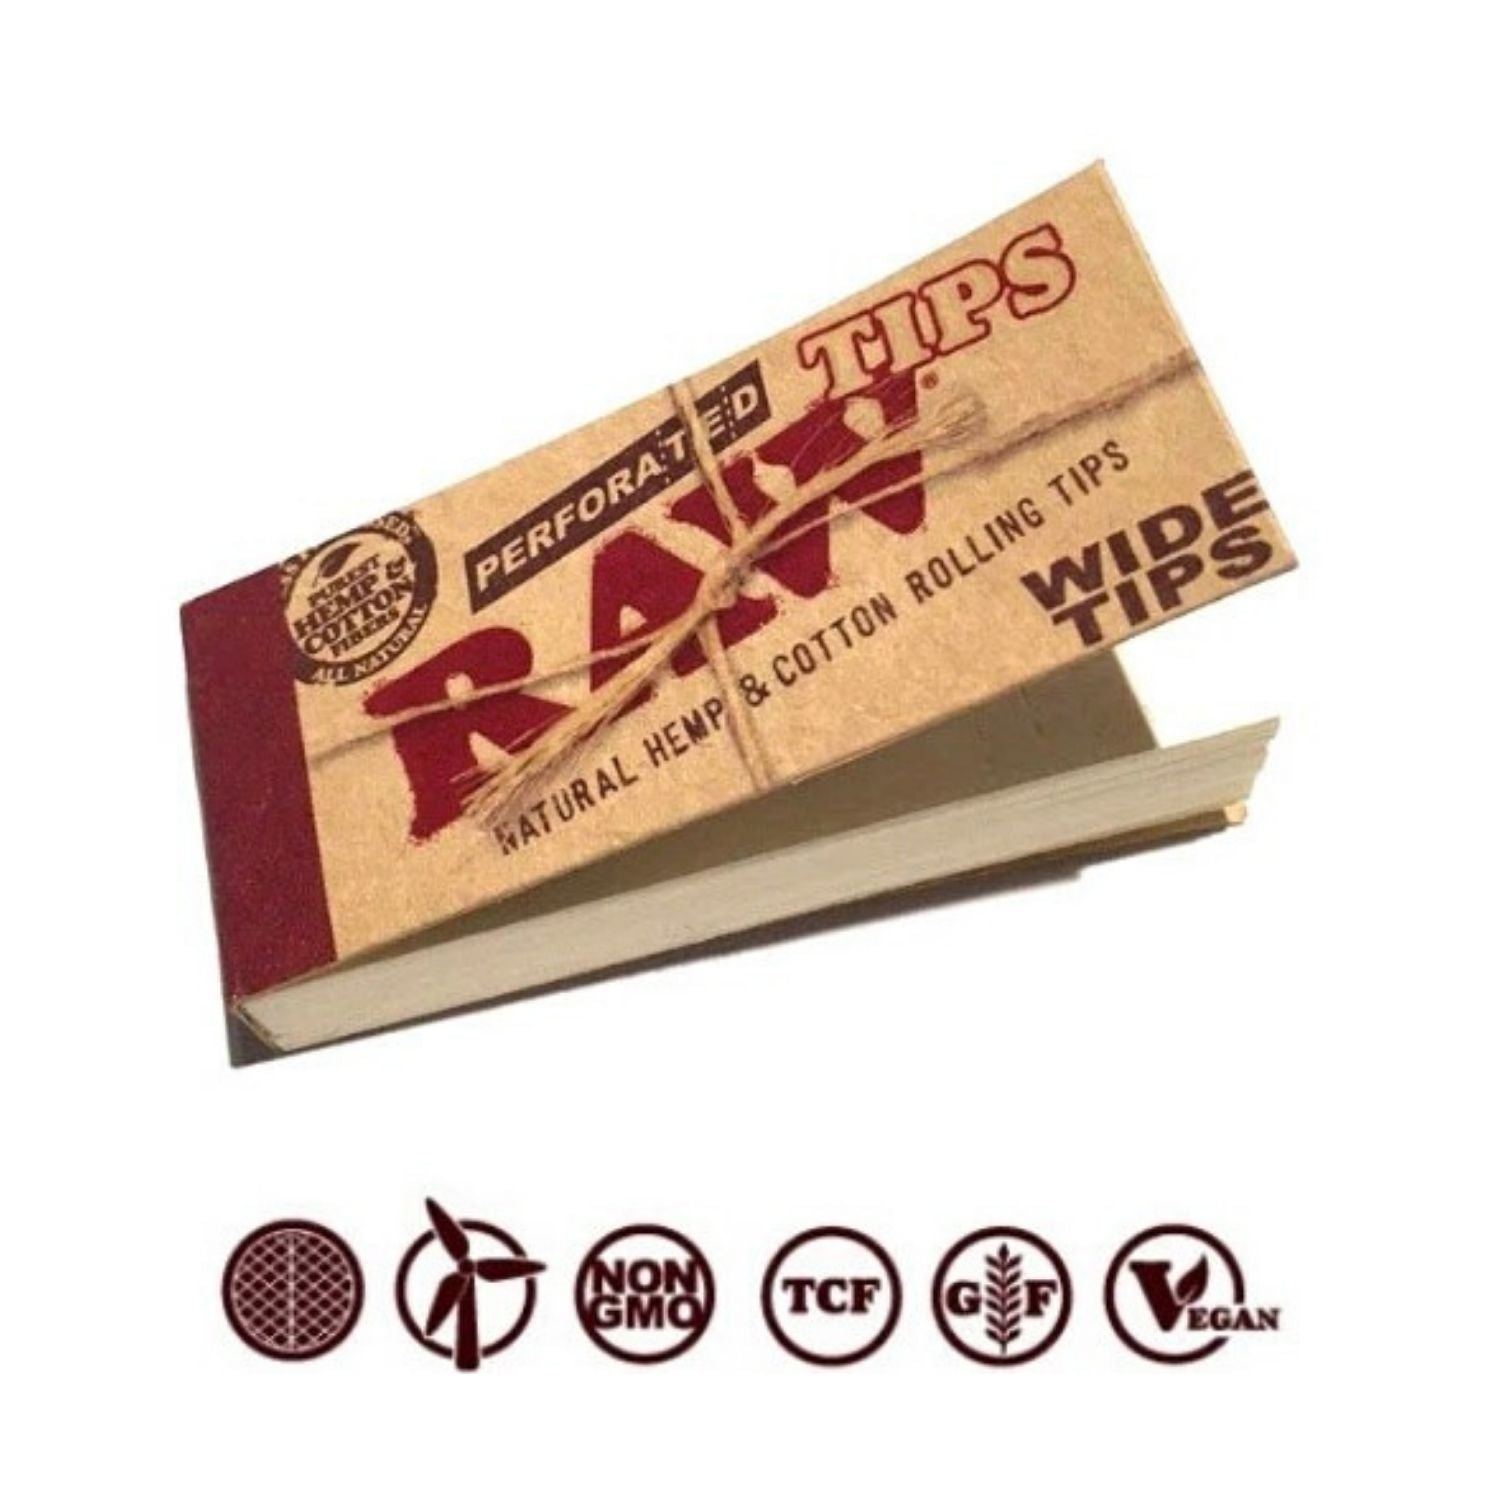 RAW Black Rolling Paper with RAW Wide Perforated Tips - Set of 5